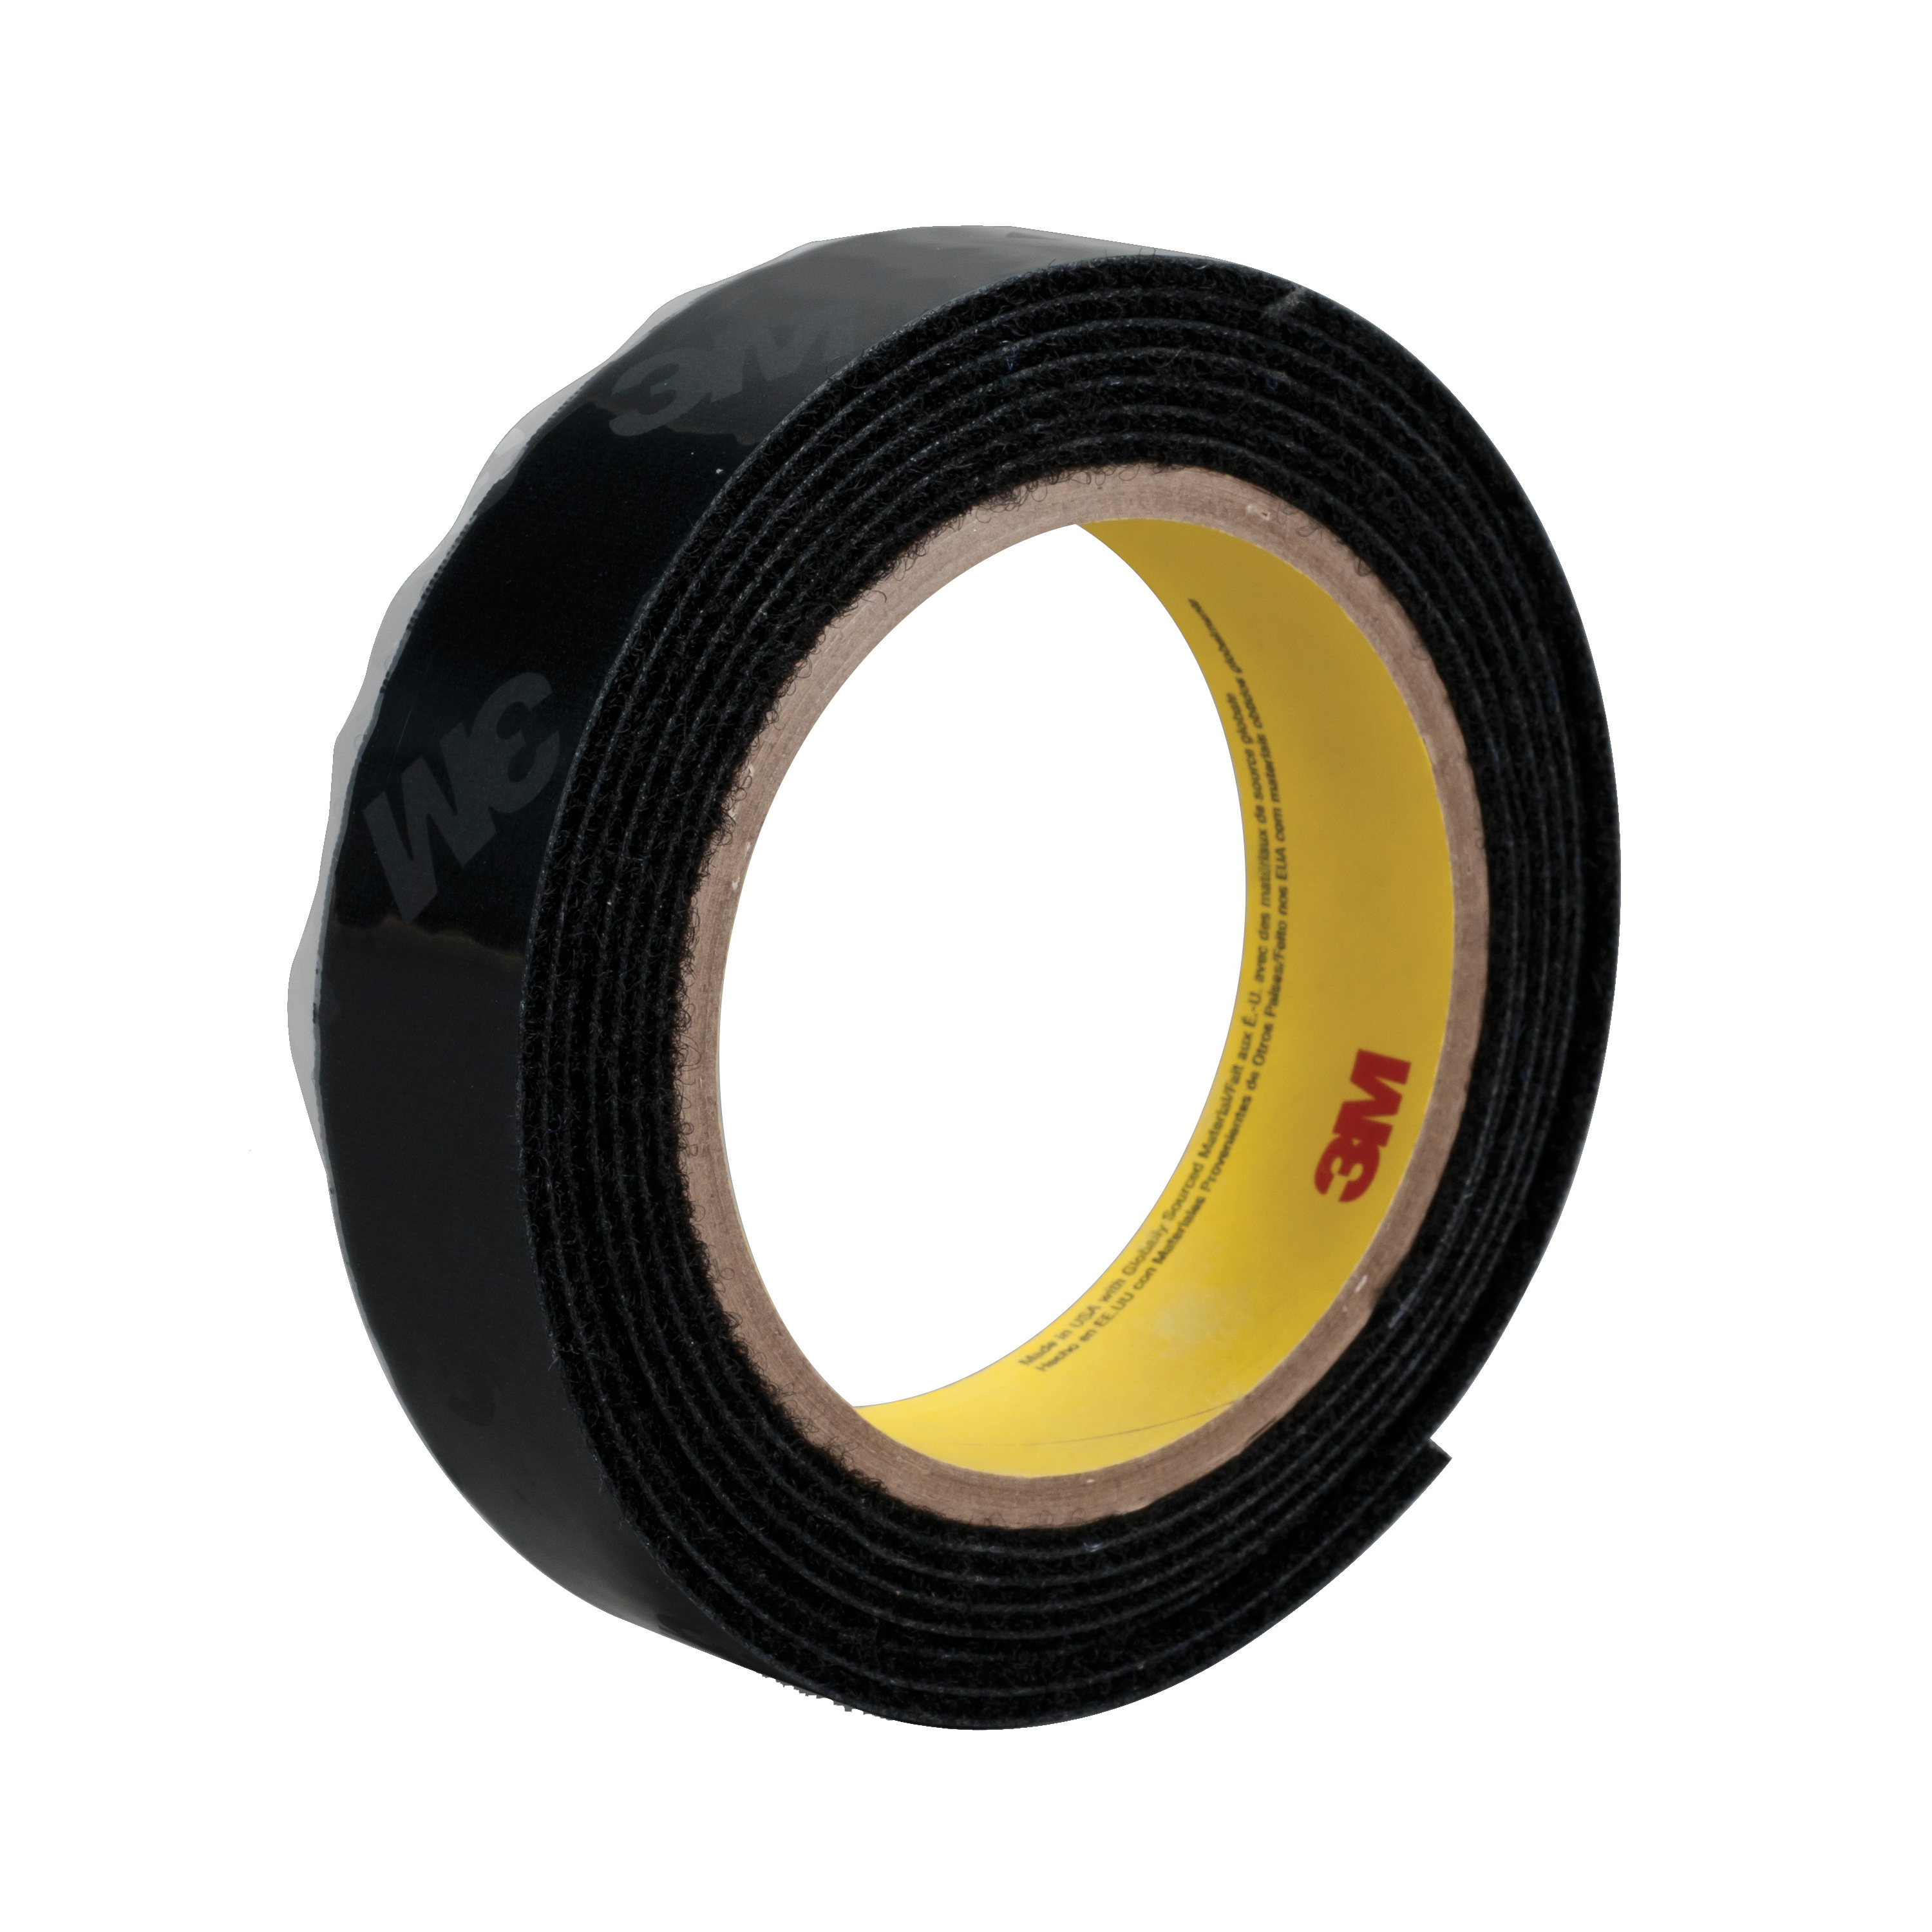 3M™ 021200-87314 Reclosable Loop Fastener Tape, 50 yd L x 1-1/2 in W, 0.17 in THK Engaged, High Performance Acrylic PSA Adhesive, Woven Nylon Backing, Black